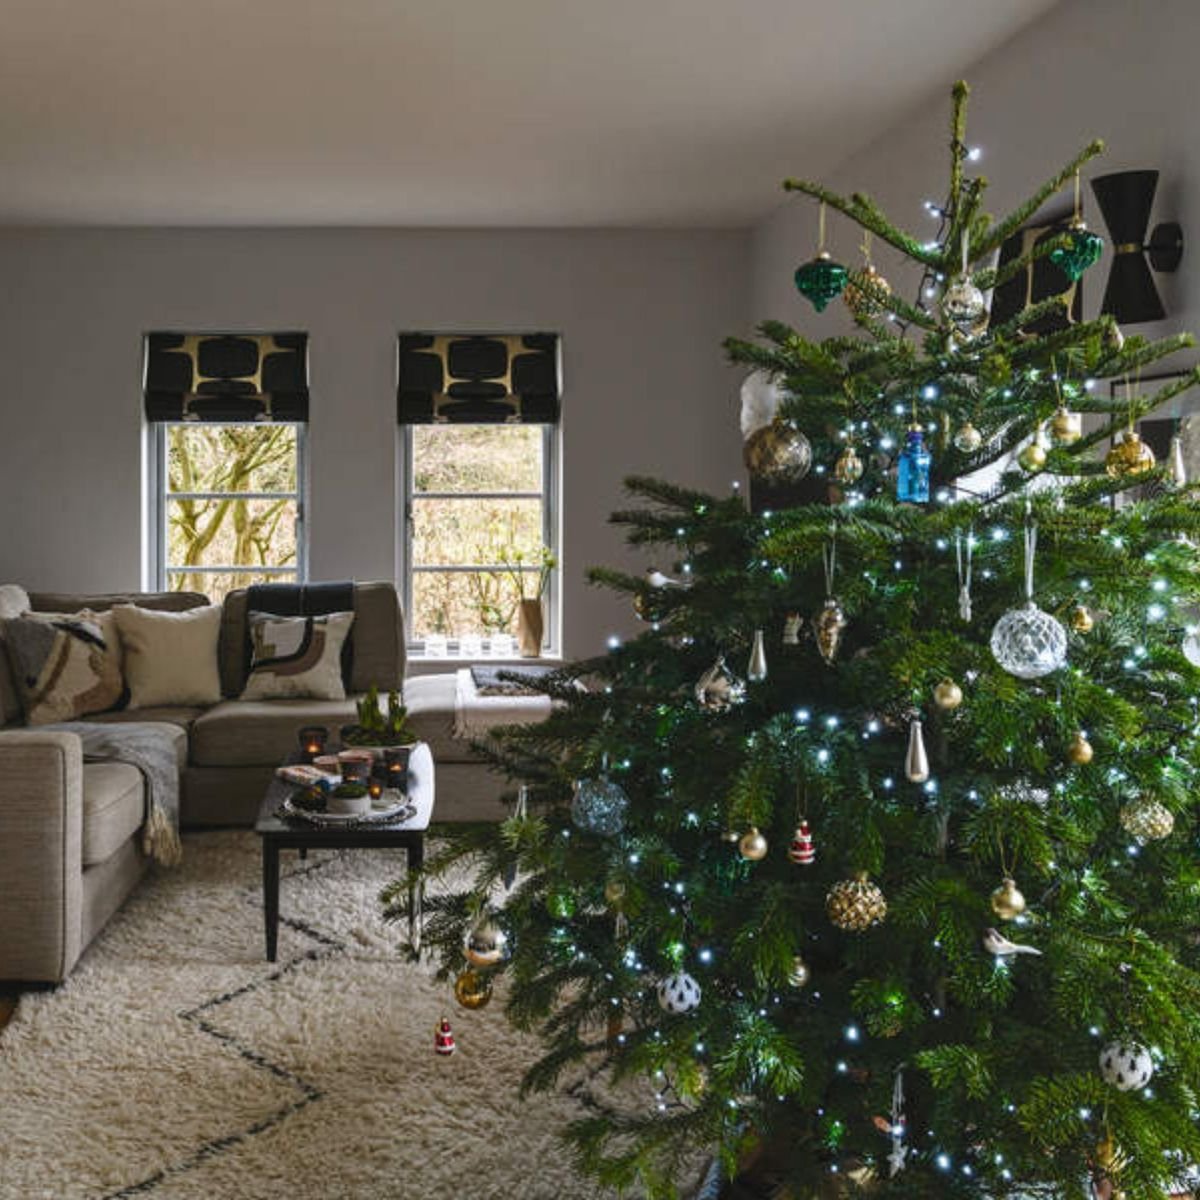 How to decorate a Christmas tree – a step by step guide, with tips from the professionals